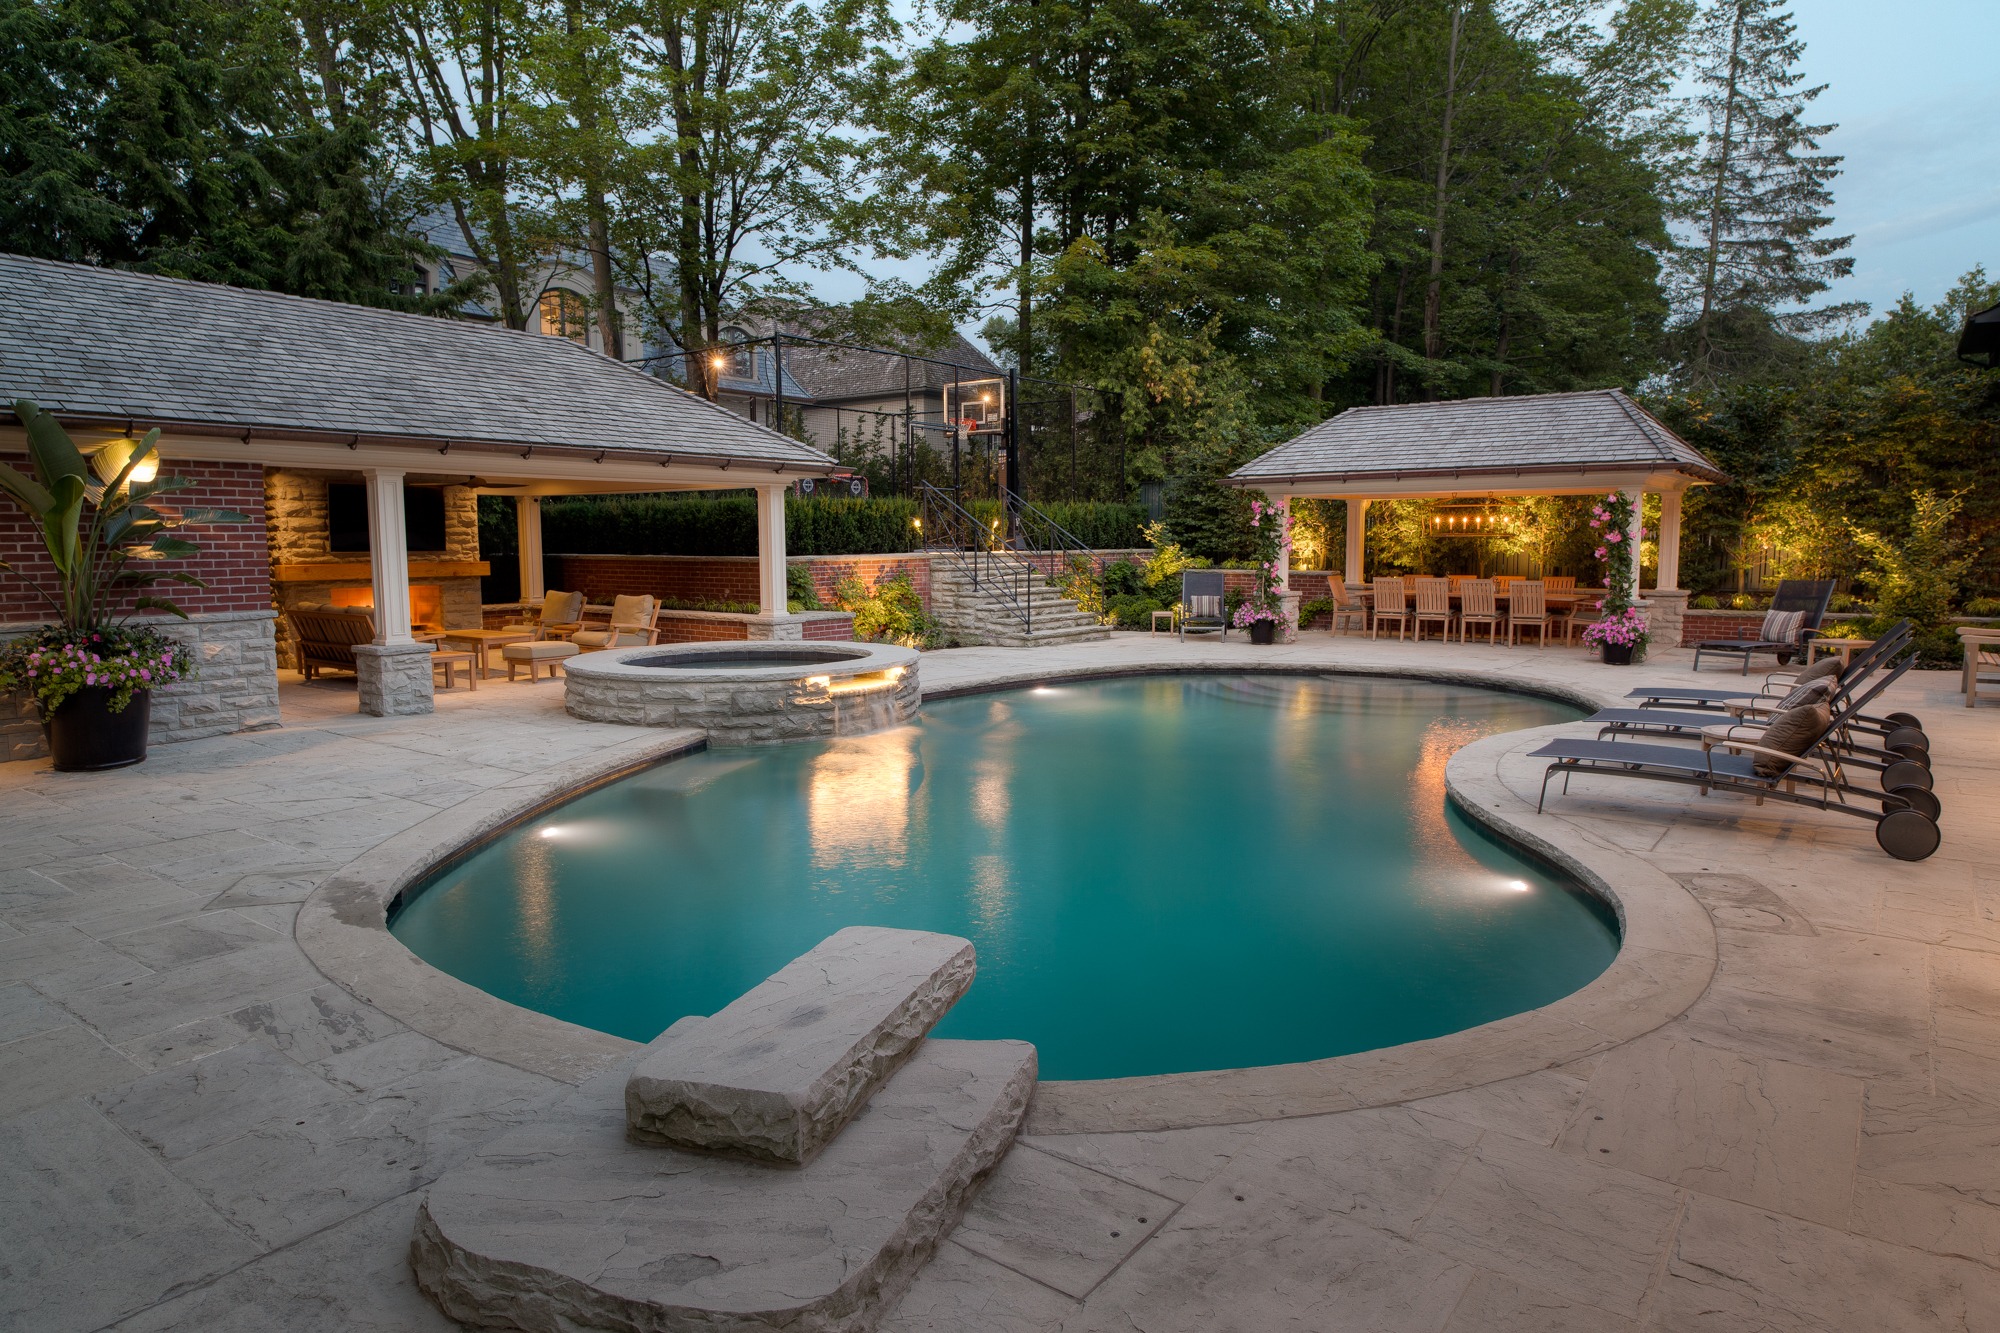 Luxurious backyard with an illuminated, curvy swimming pool at dusk featuring lounges, a fire pit, covered patios, and lush greenery.